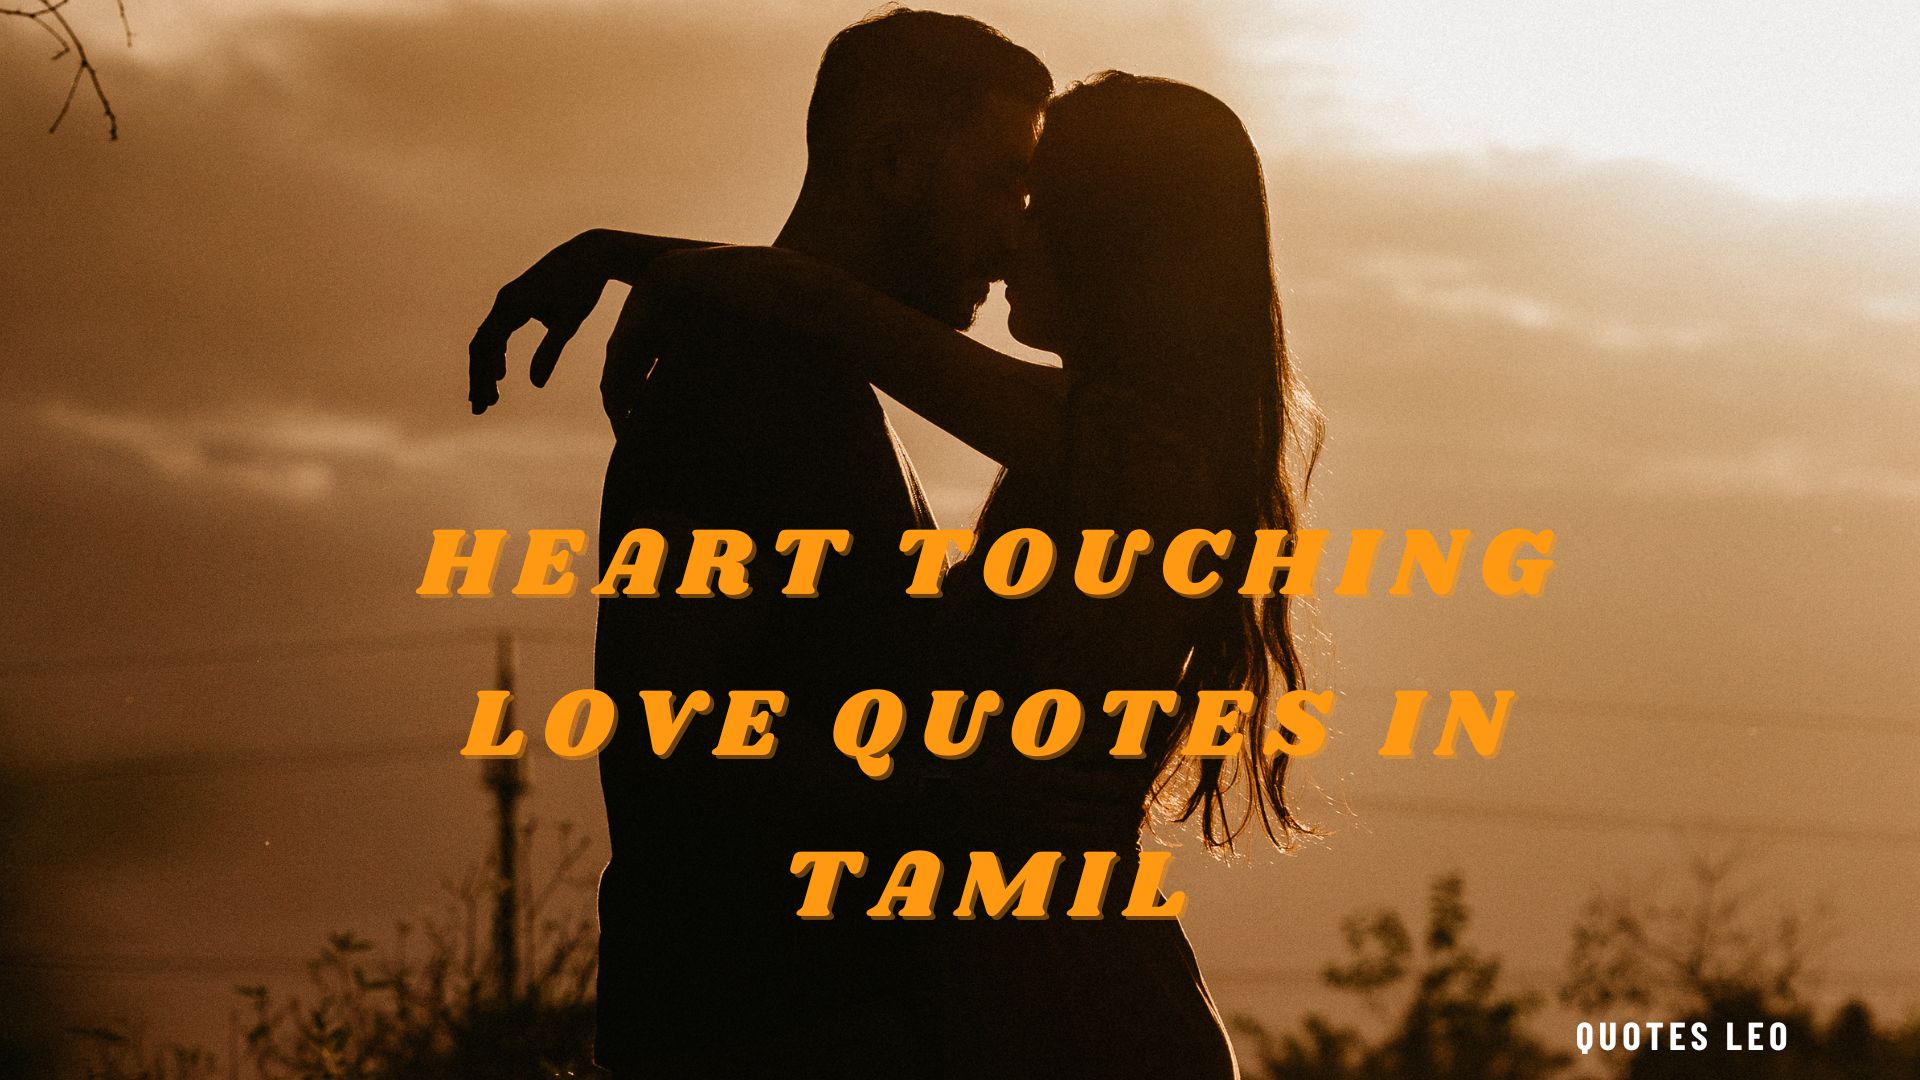 Heart touching love quotes in Tamil